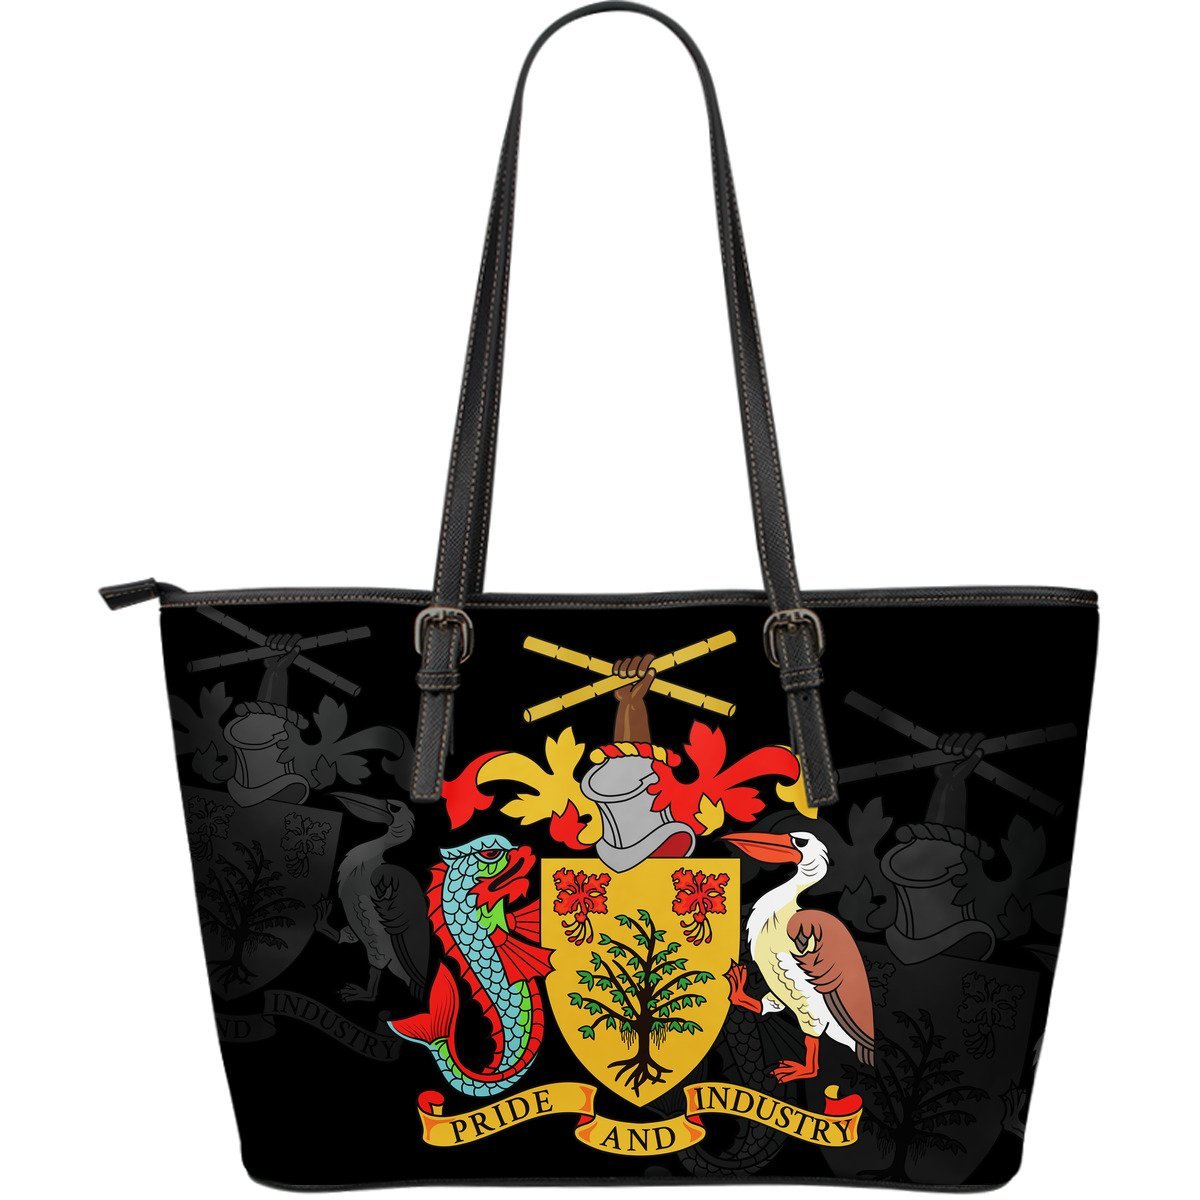 barbados-leather-tote-bag-large-size